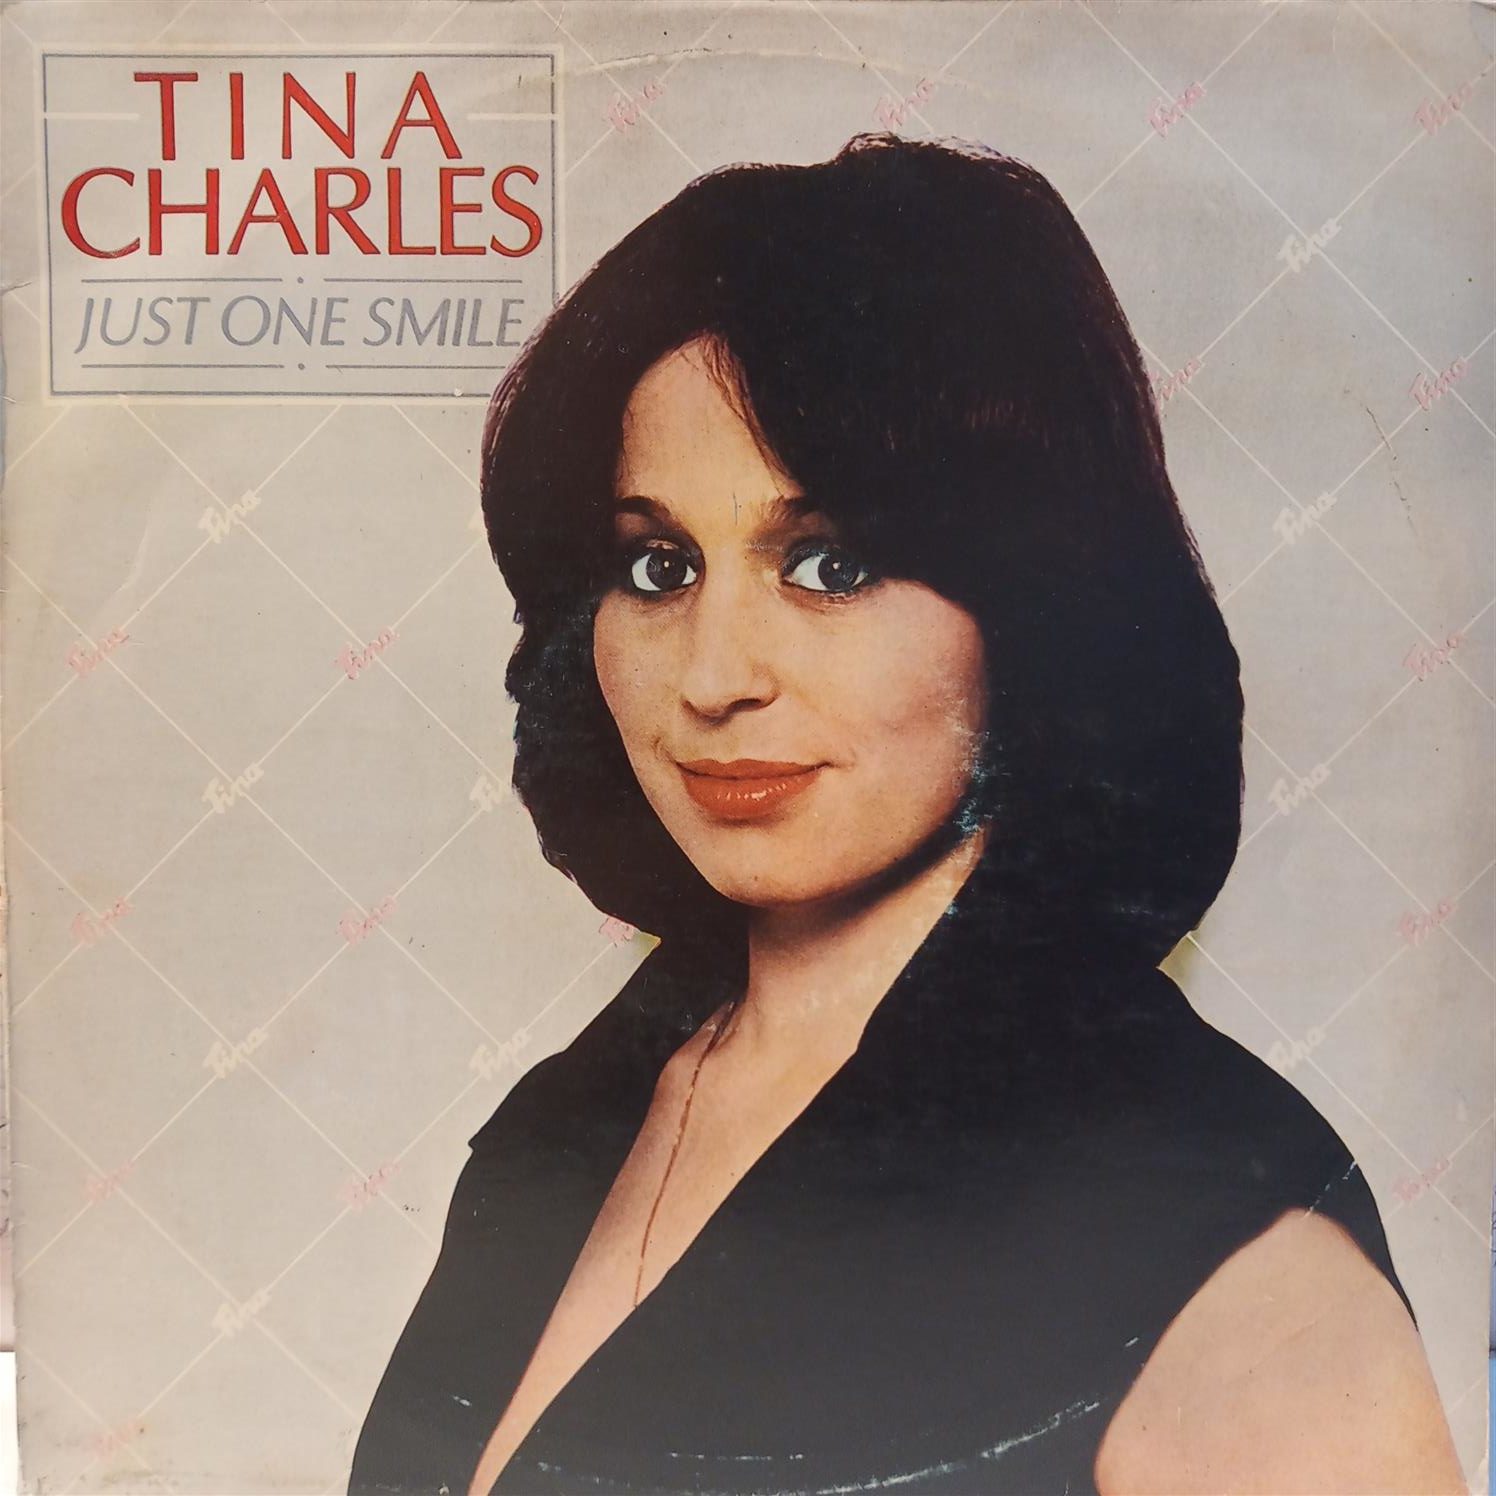 TINA CHARLES – JUST ONE SMILE ON